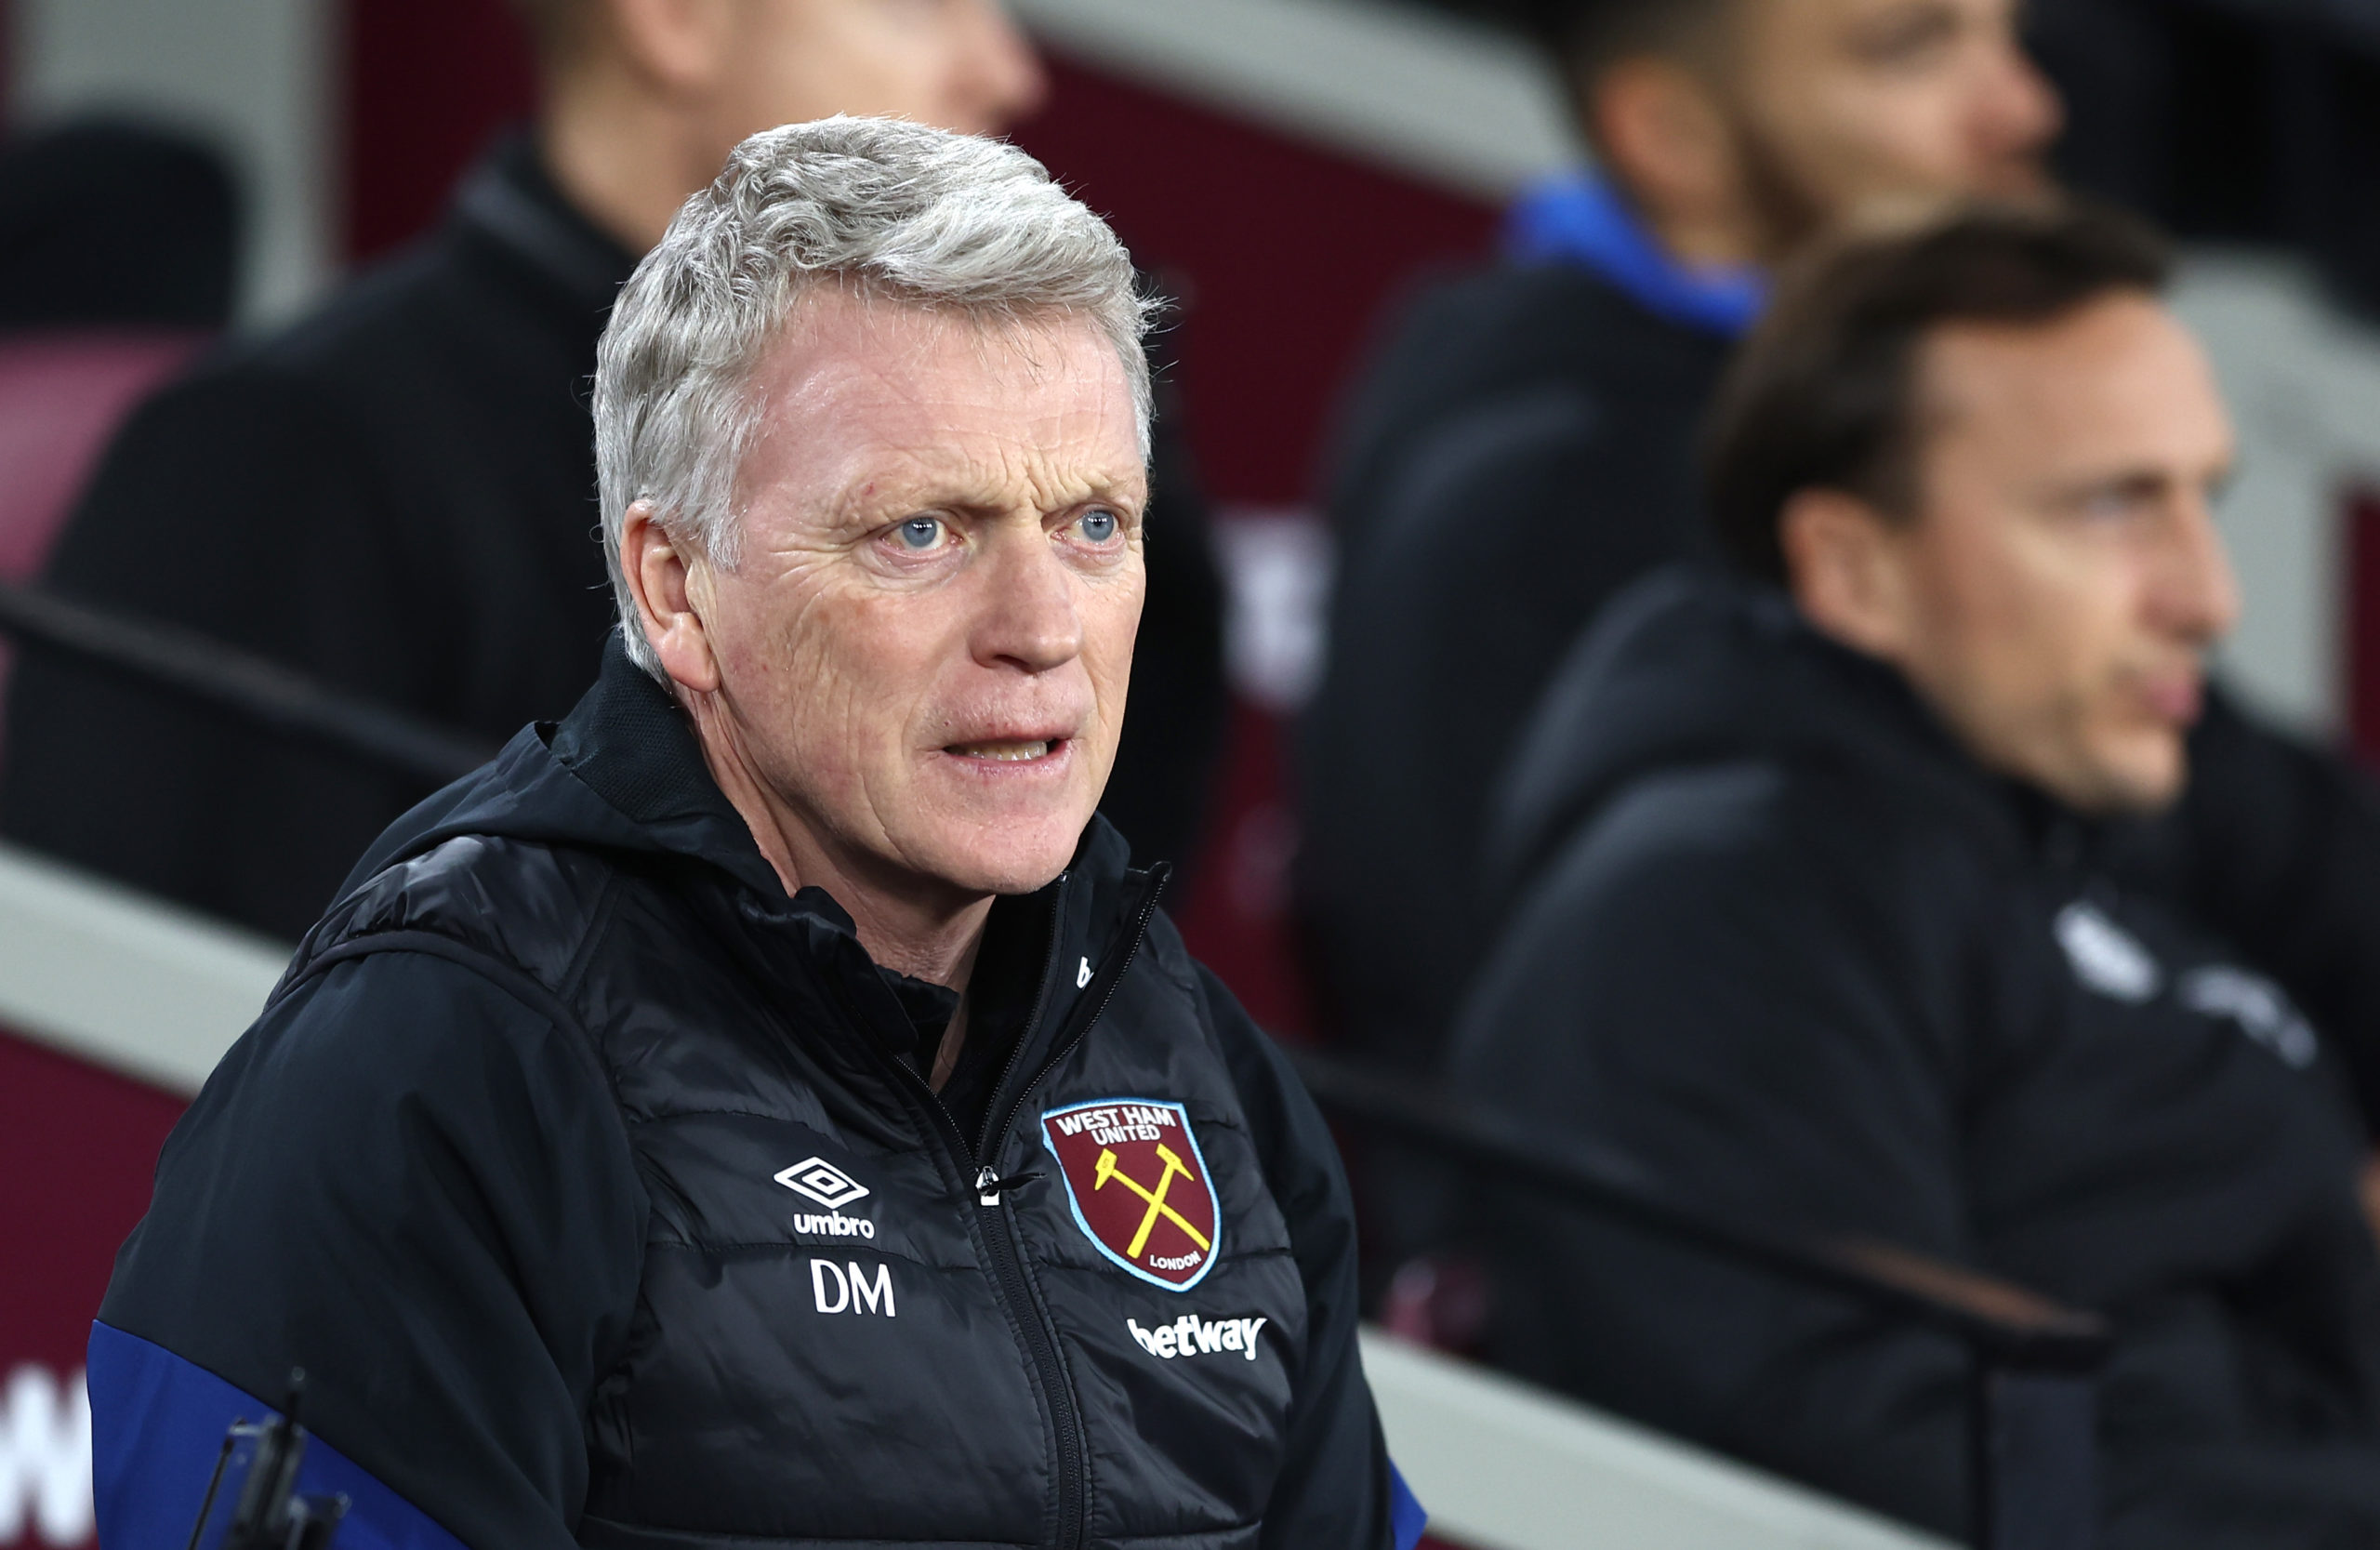 West Ham are at base camp one in their mission to climb Everest says David Moyes